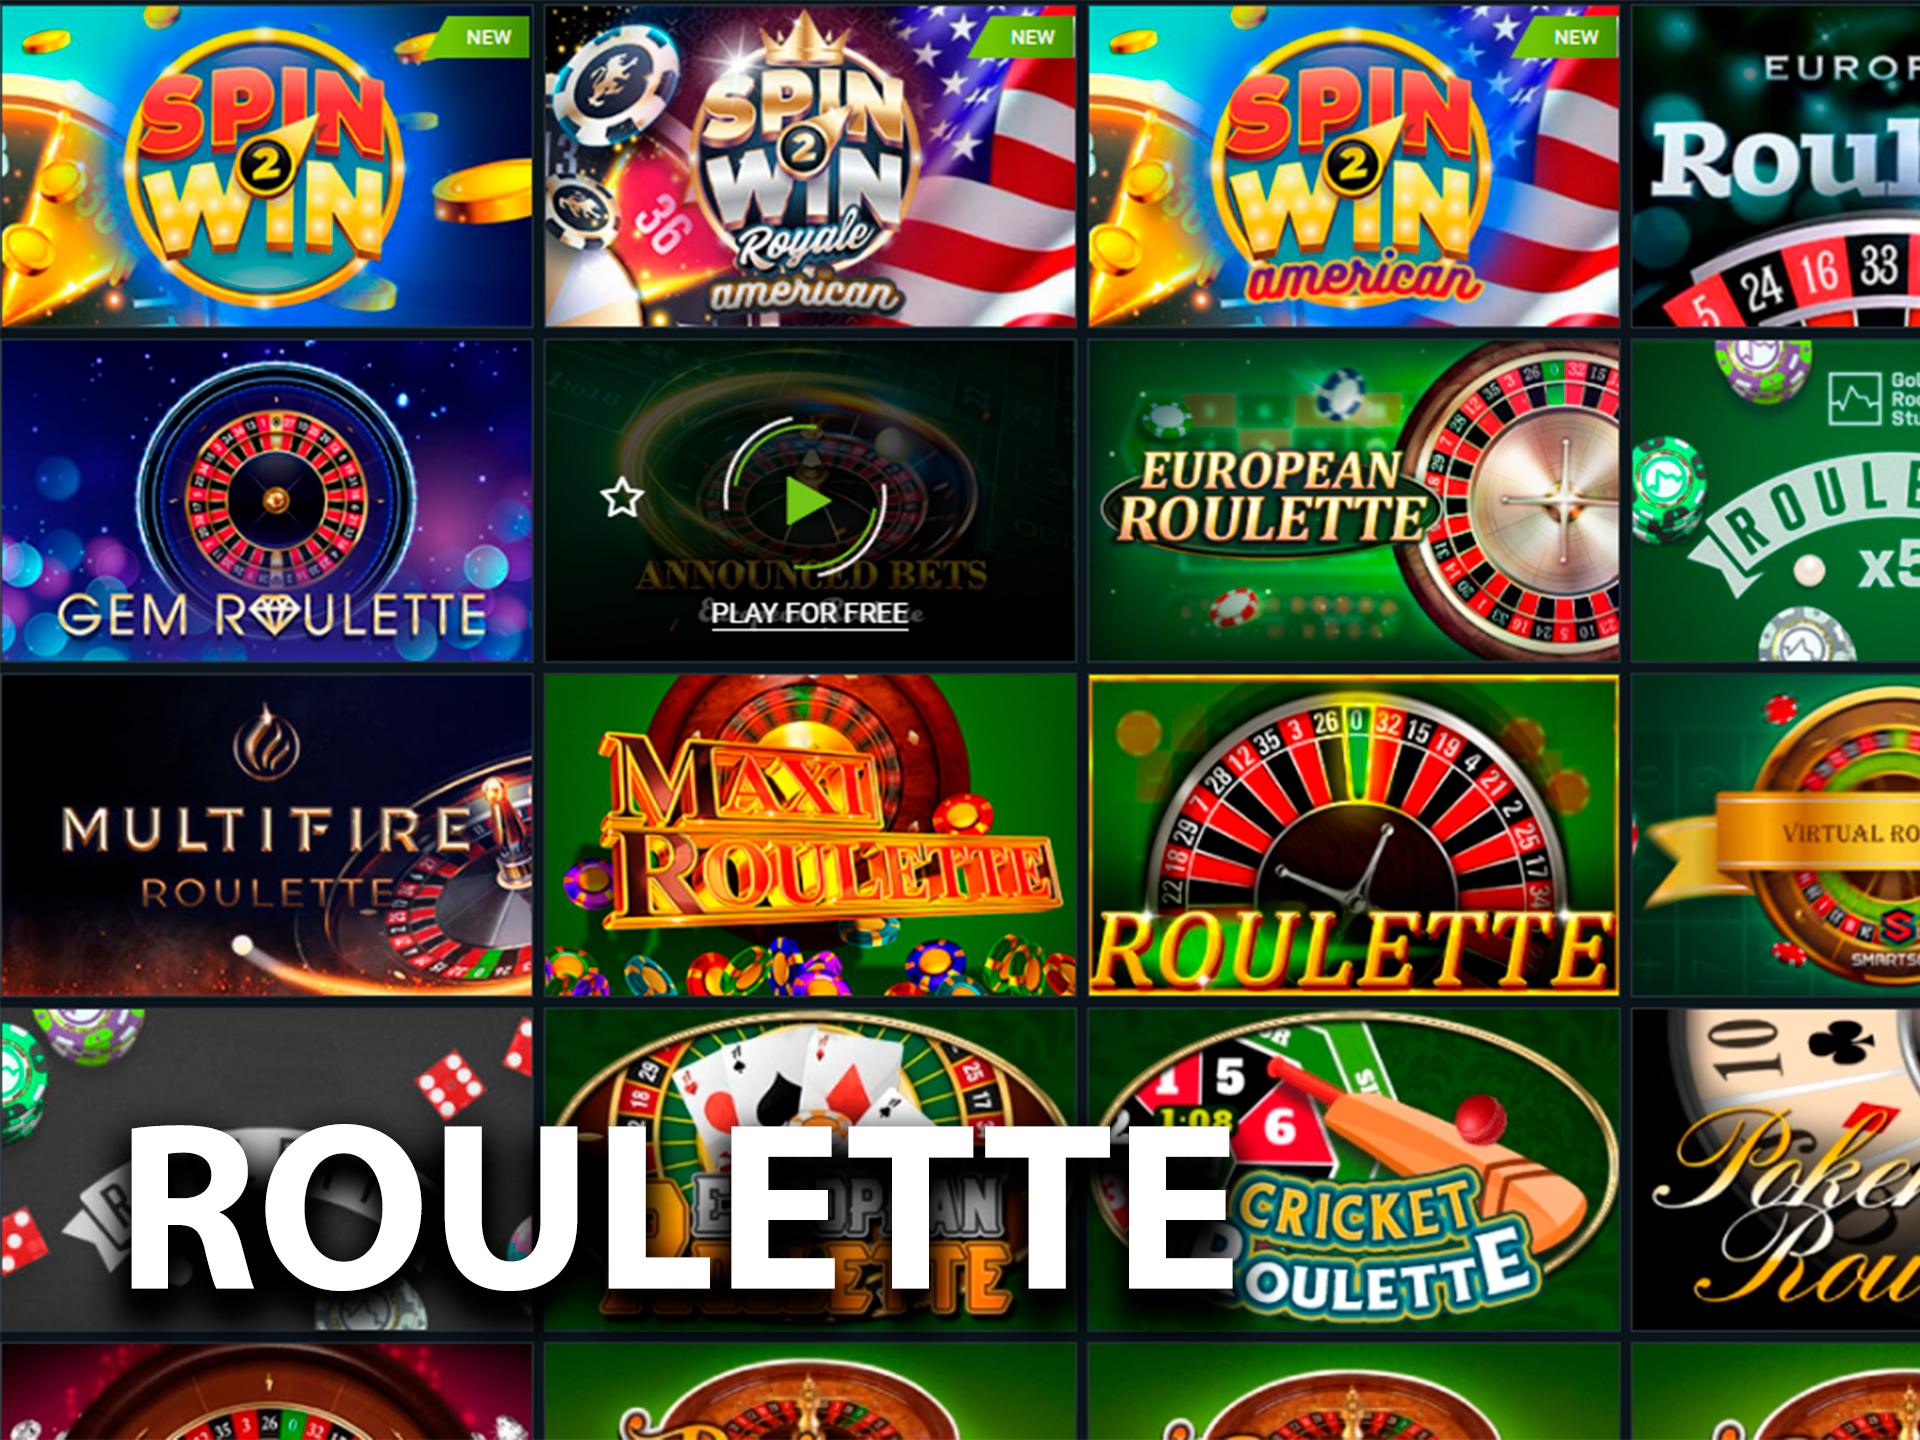 You'll find many variants of online roulette in the 1xbet casino.